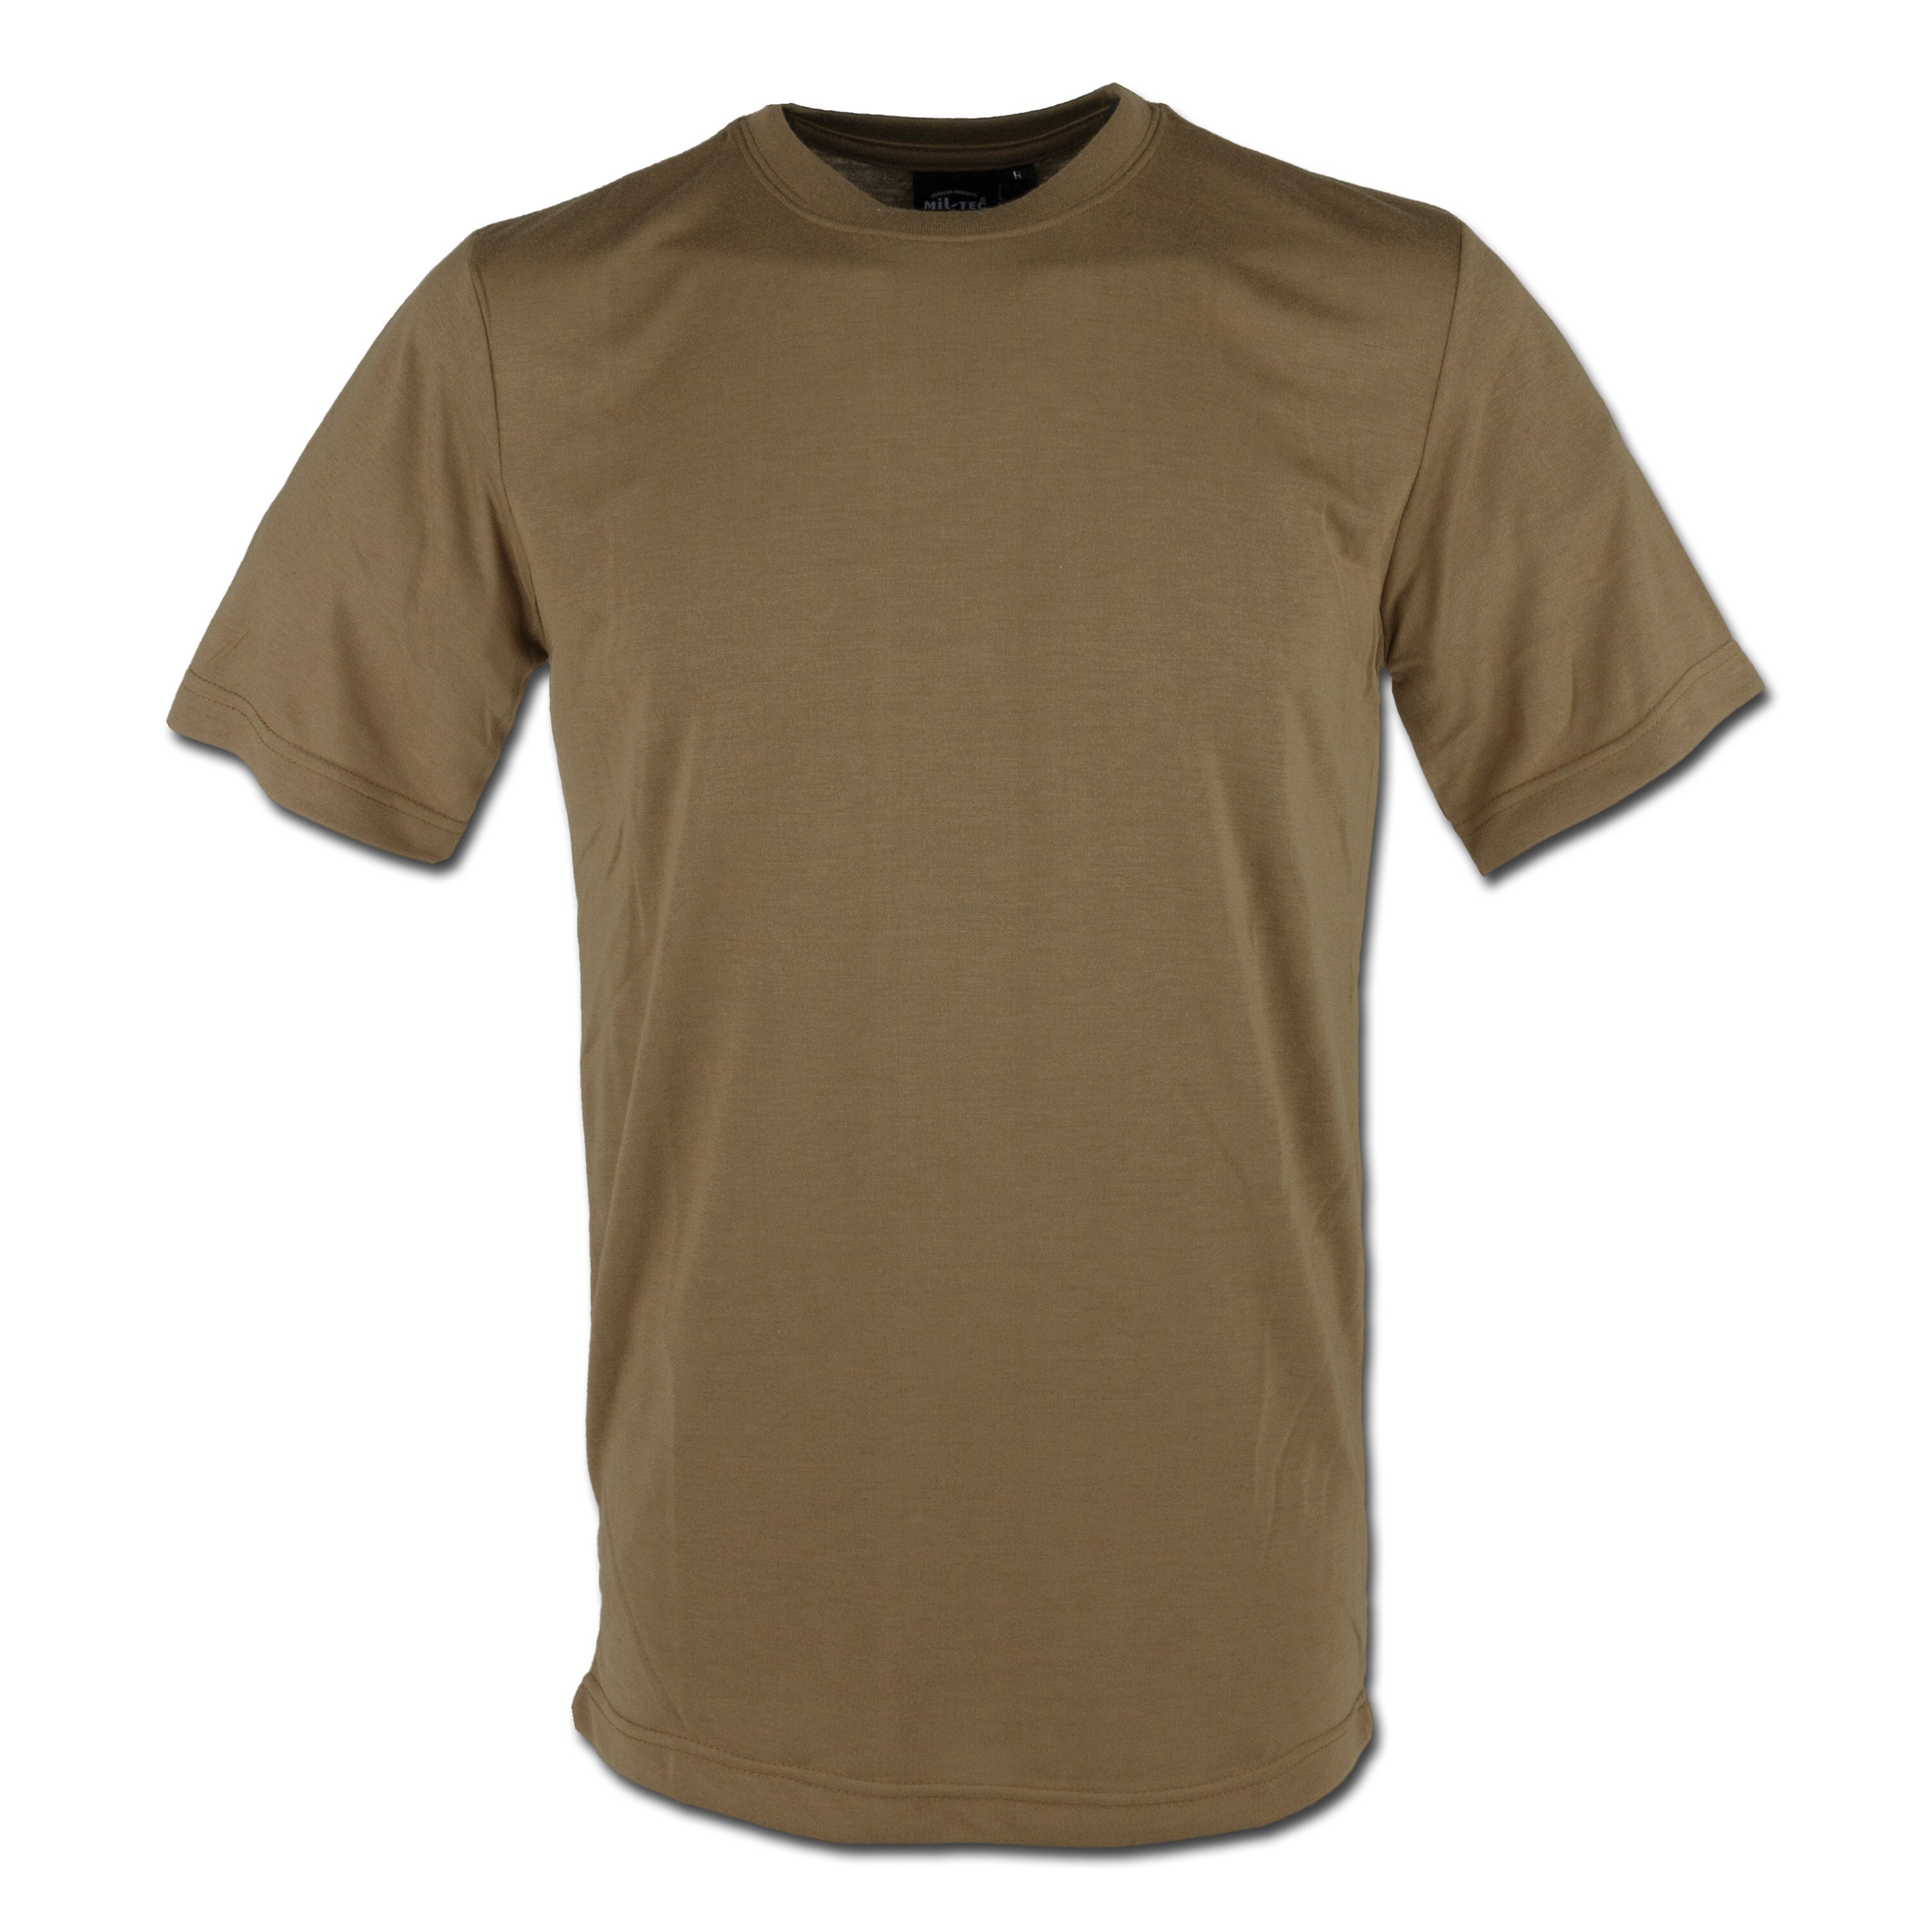 Purchase the Mil-Tec T-Shirt CoolMax coyote by ASMC